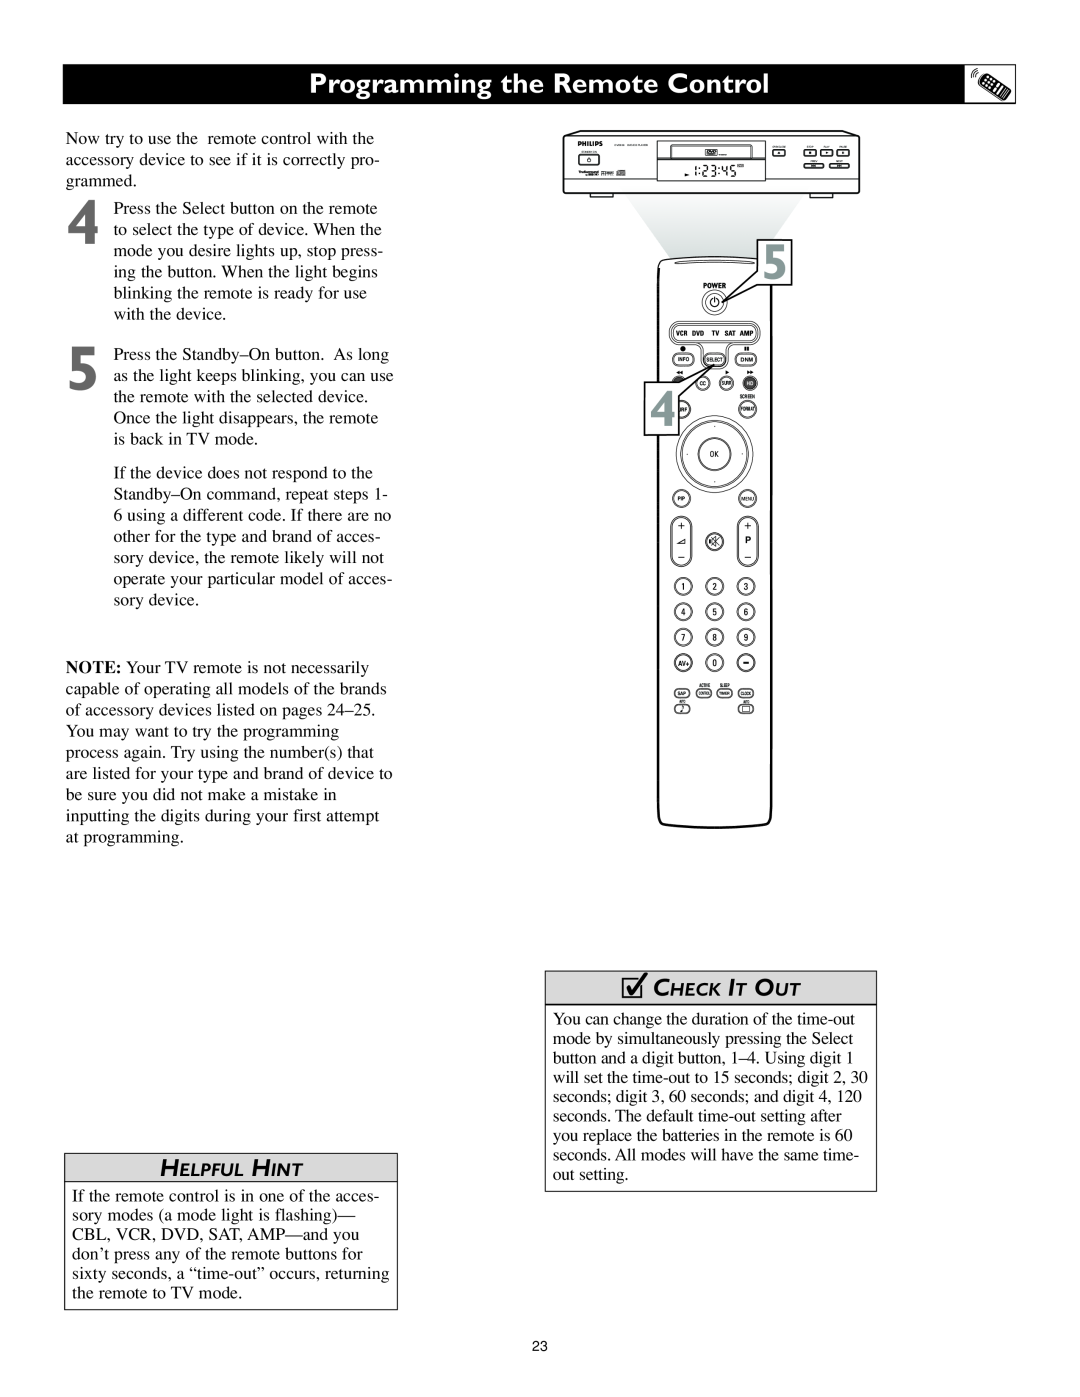 Philips 55PL9524, 62PL9524 setup guide Programming the Remote Control, Helpful Hint, c CHECK IT OUT 